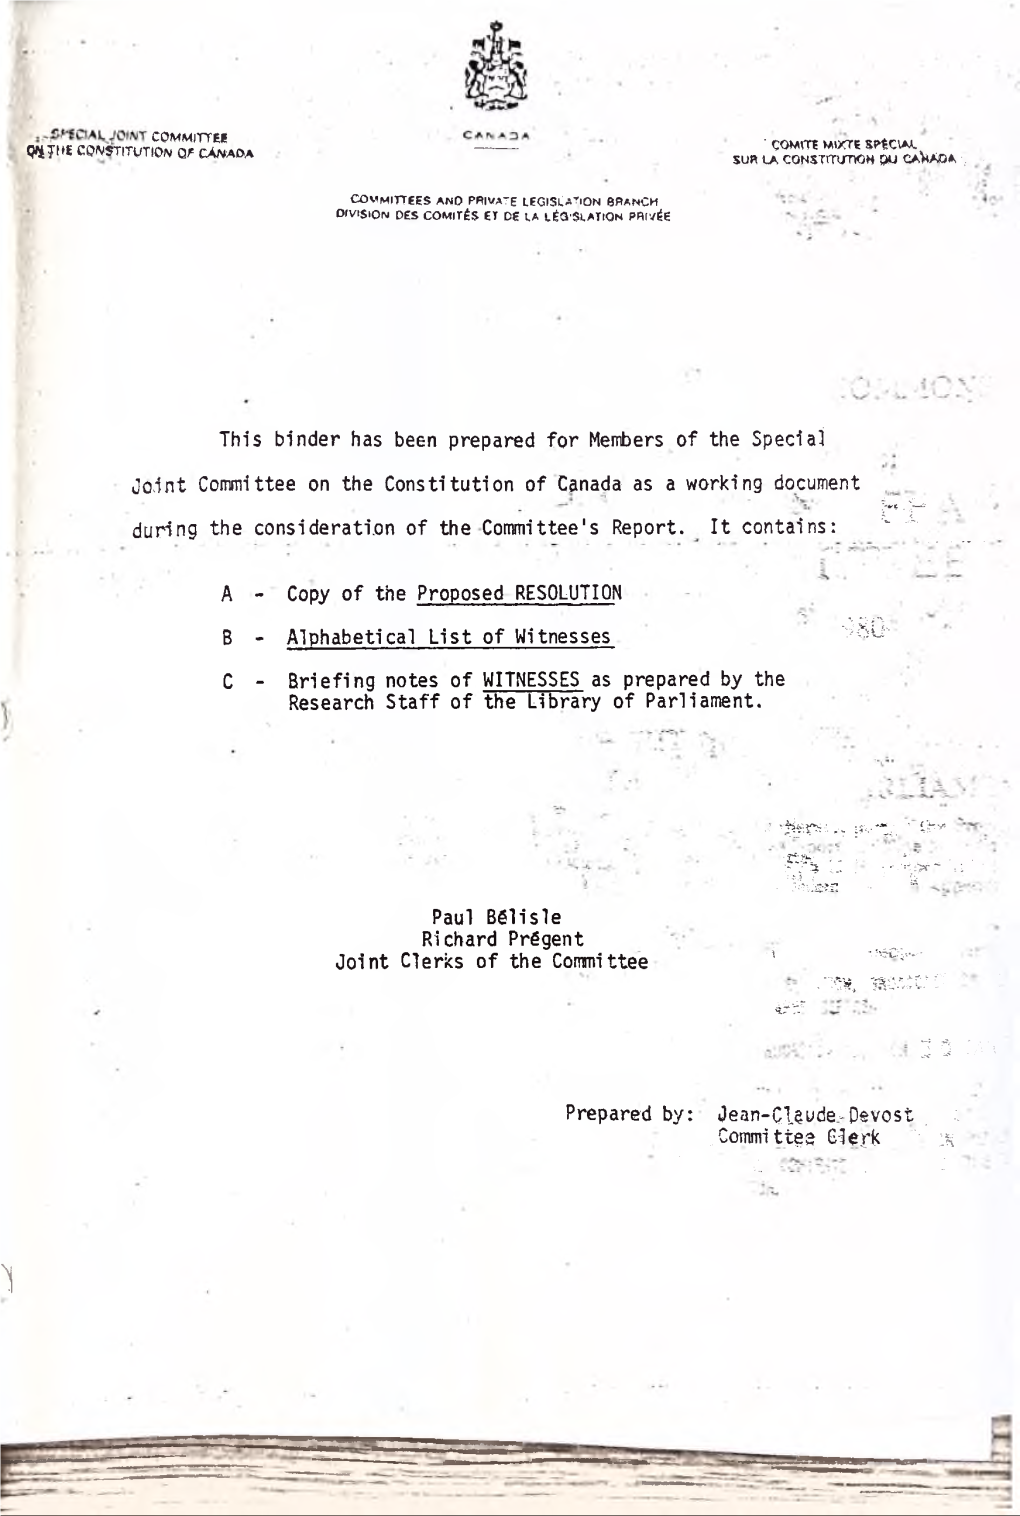 Briefing Notes of WITNESSES As Prepared by the Research Staff of the Library of Parliament